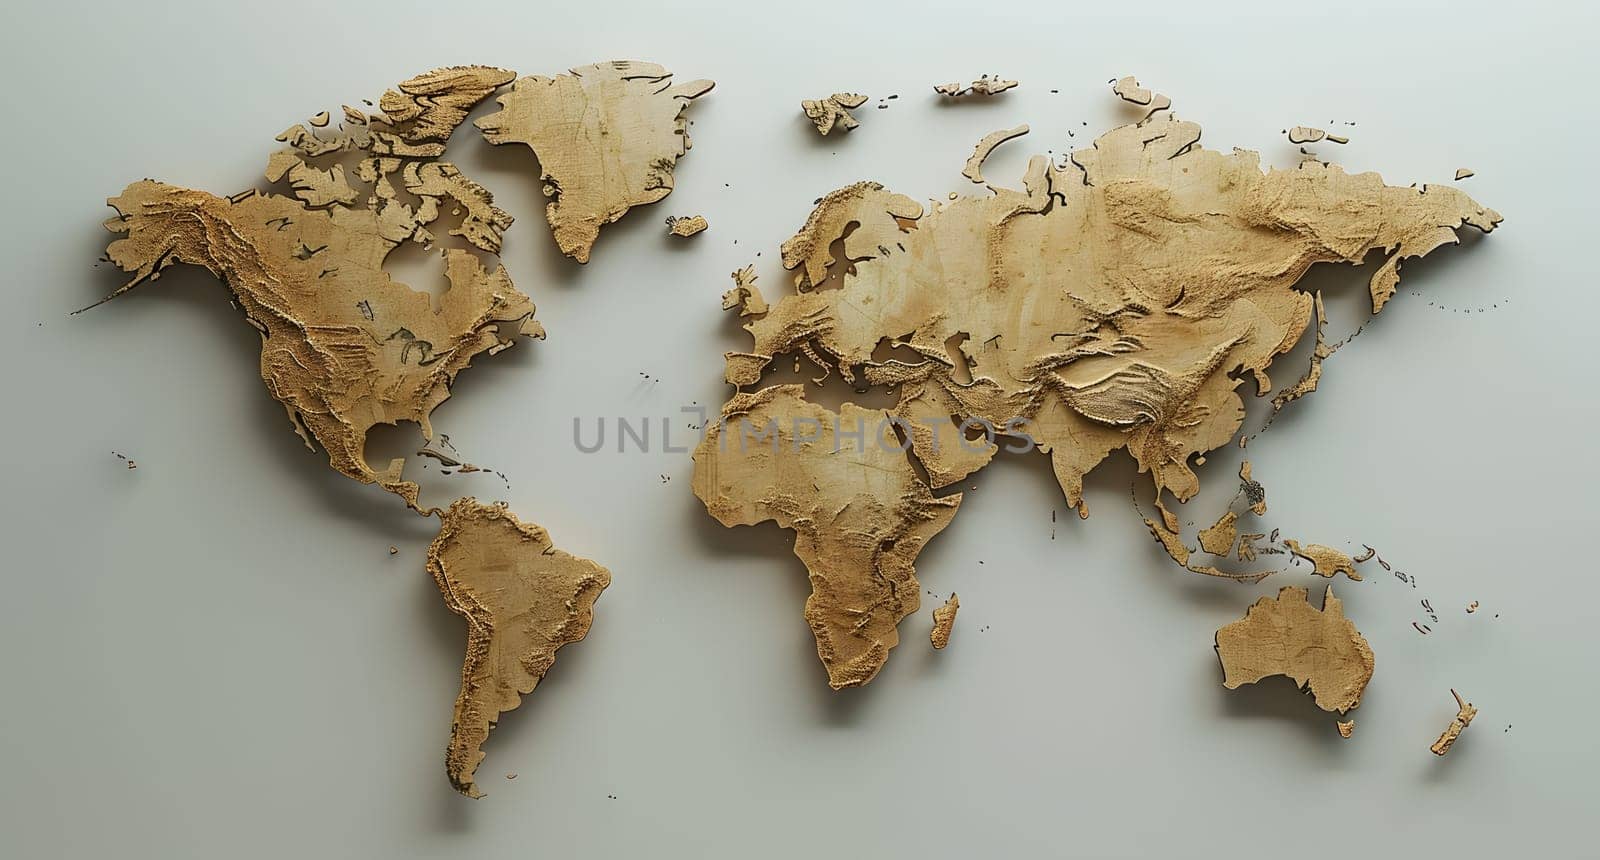 A wooden map of the world is displayed on a white surface by Nadtochiy